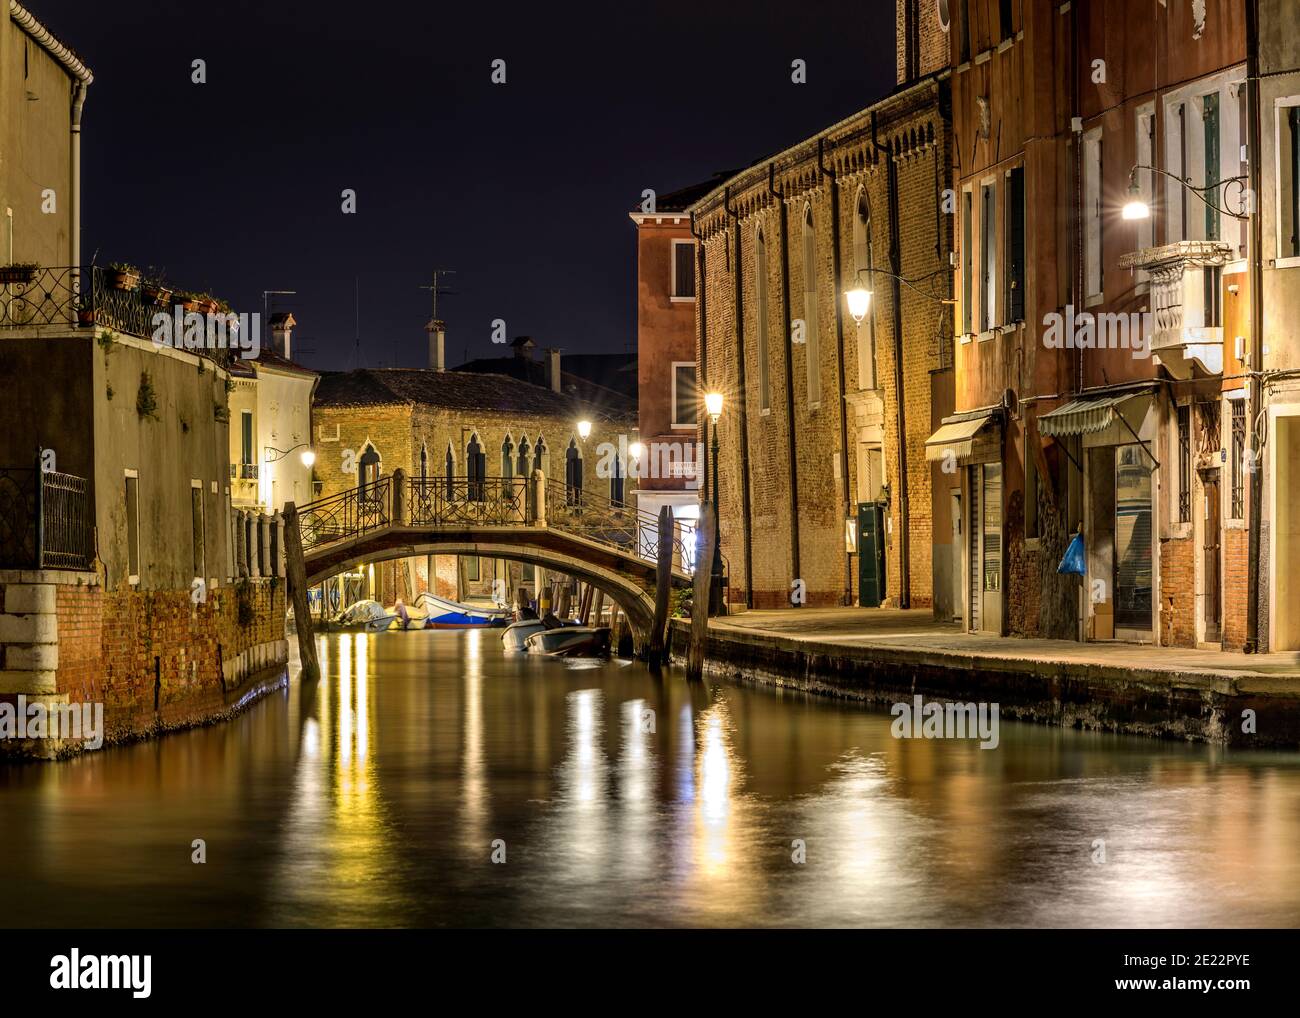 Night at Murano - Night view of a small old brick bridge, Ponte San Pietro Martire, crossing over a narrow waterway, at the center of Murano, Italy. Stock Photo